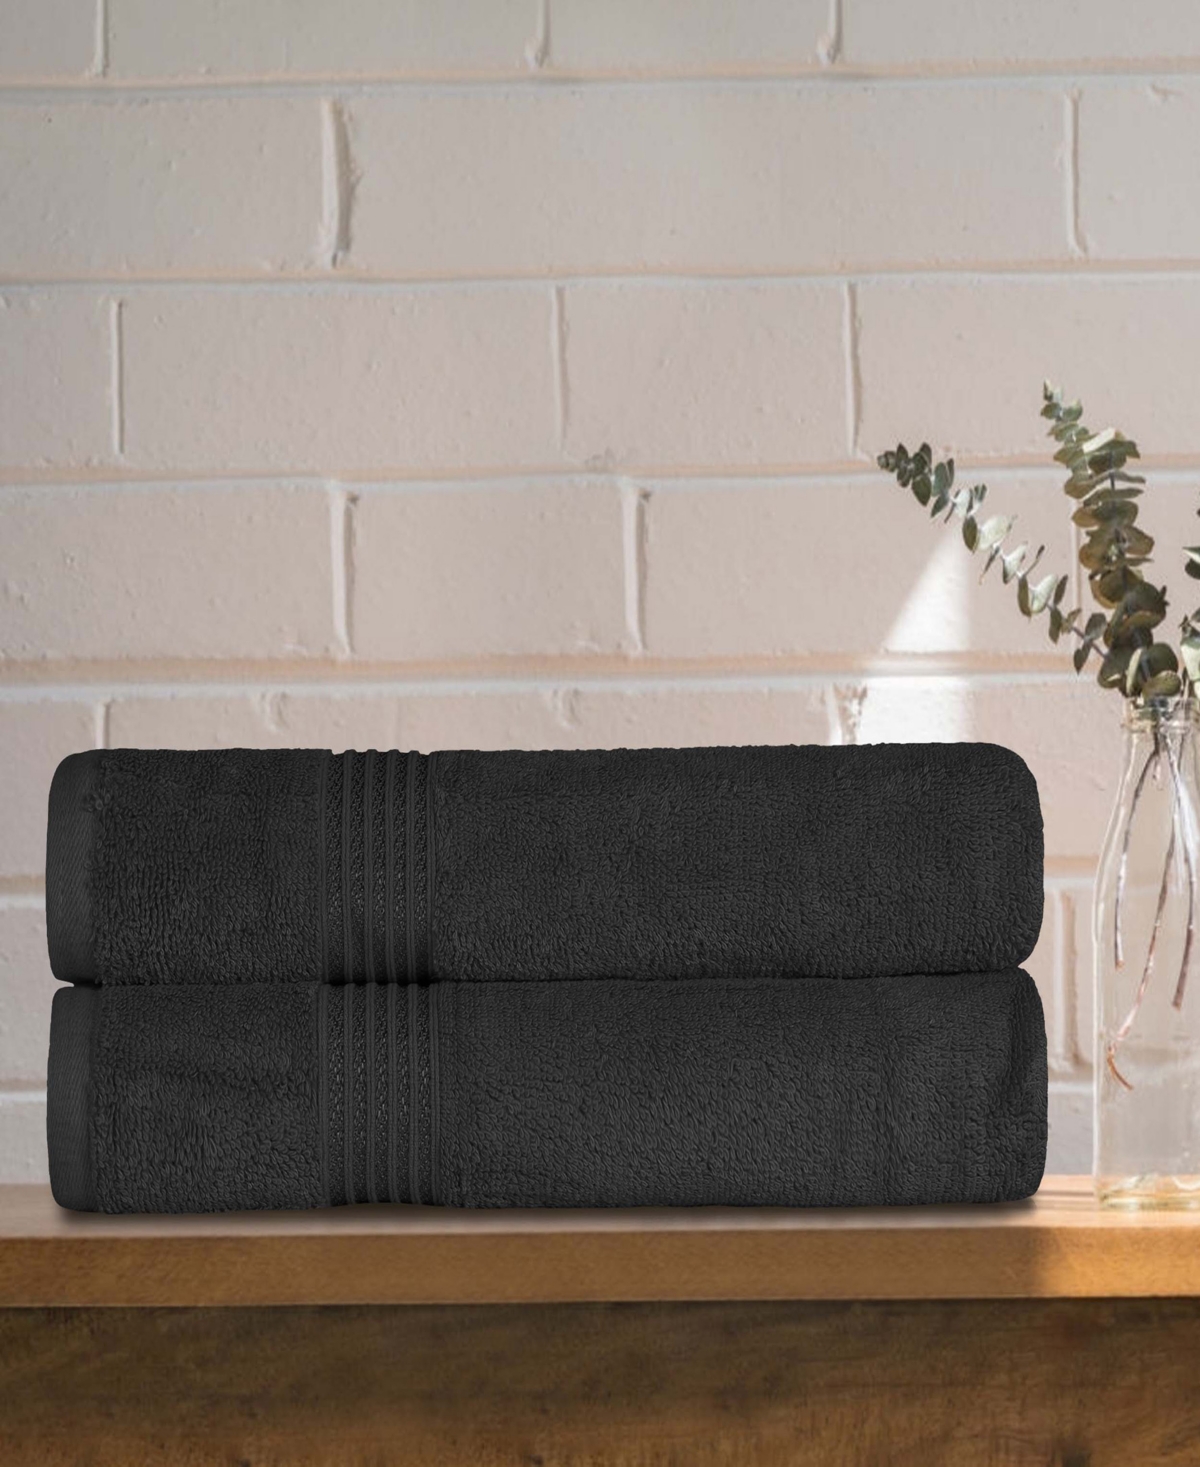 Superior Solid Quick Drying Absorbent 2 Piece Egyptian Cotton Bath Sheet Towel Set In Black